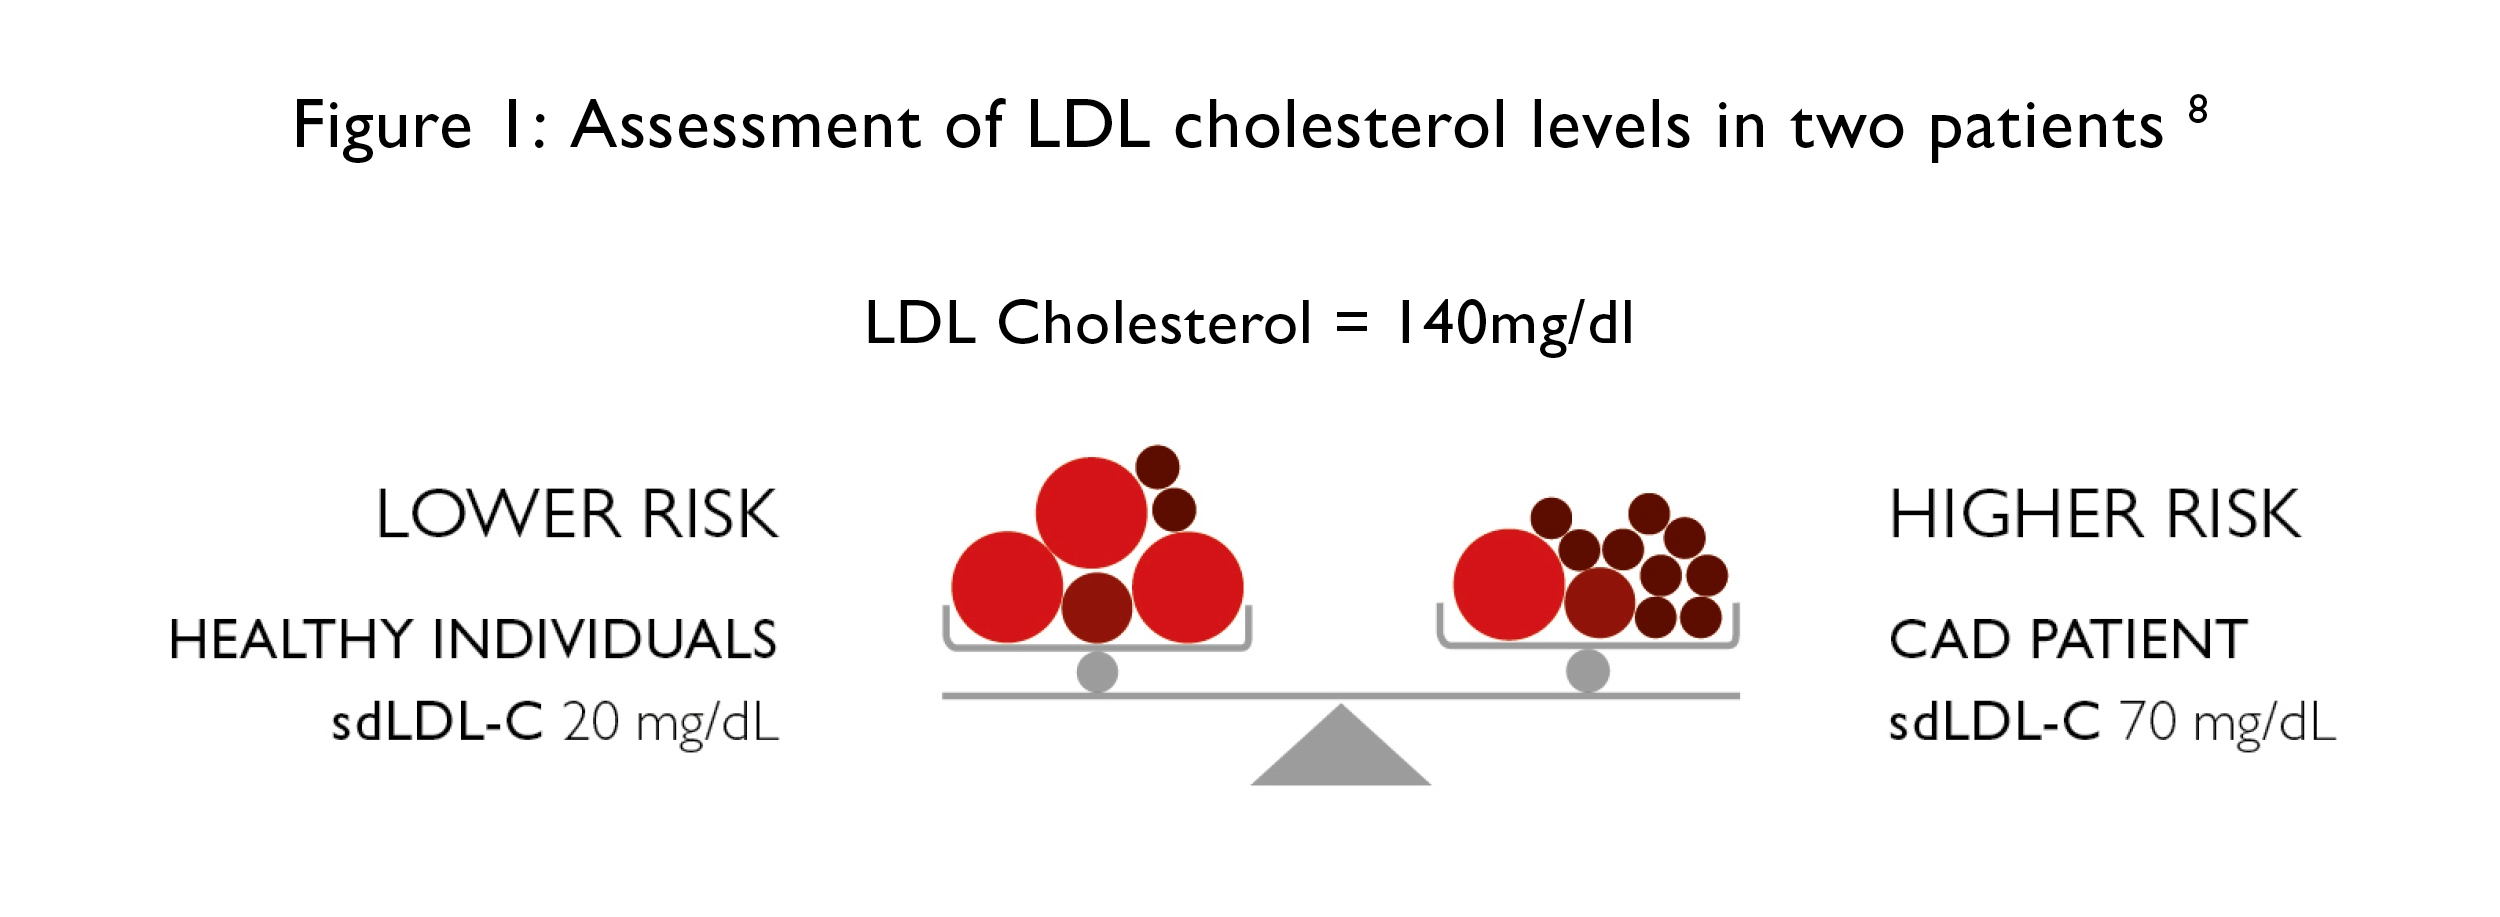 Assessment of LDL cholesterol levels in two patients (Photo courtesy of Randox).